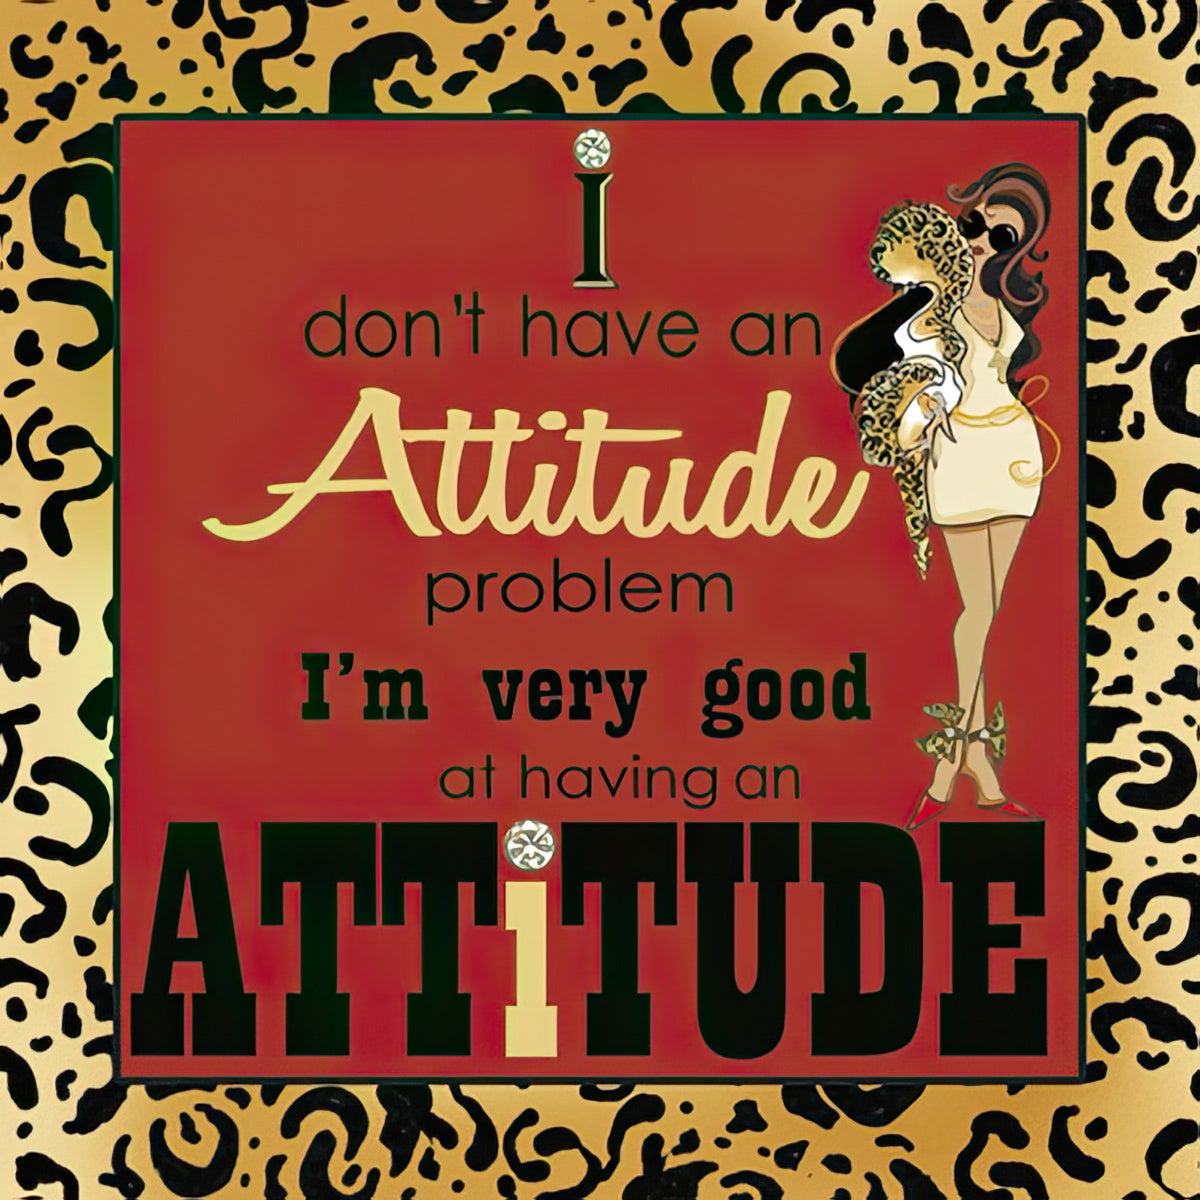 I don't have an Attitude problem...